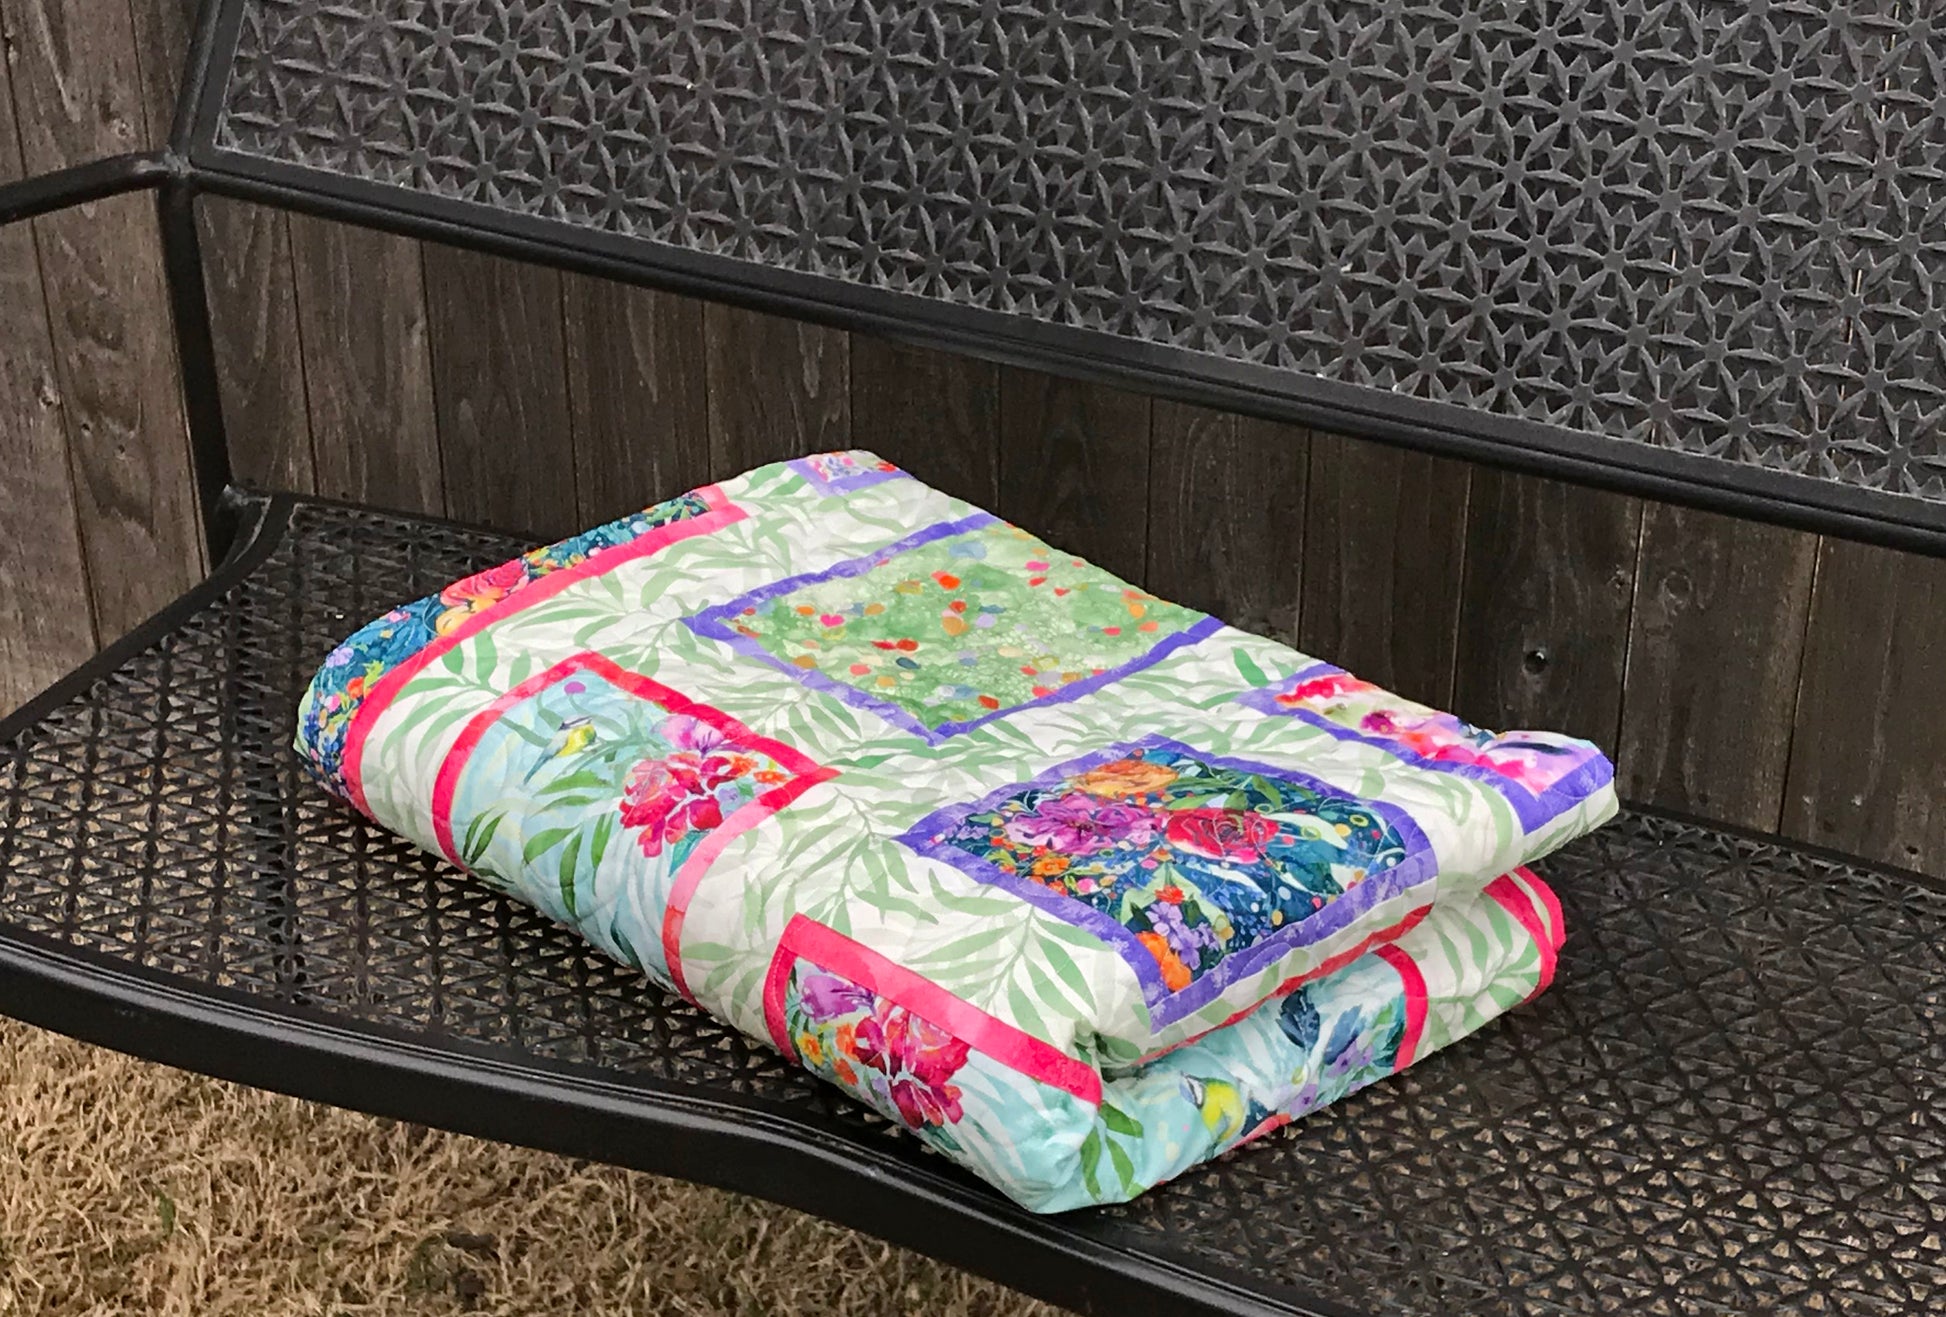 Handmade quilt featuring watercolor floral squares and rectangles framed with pink and purple fabric on a light green background. Quilt is shown folded on a bench.